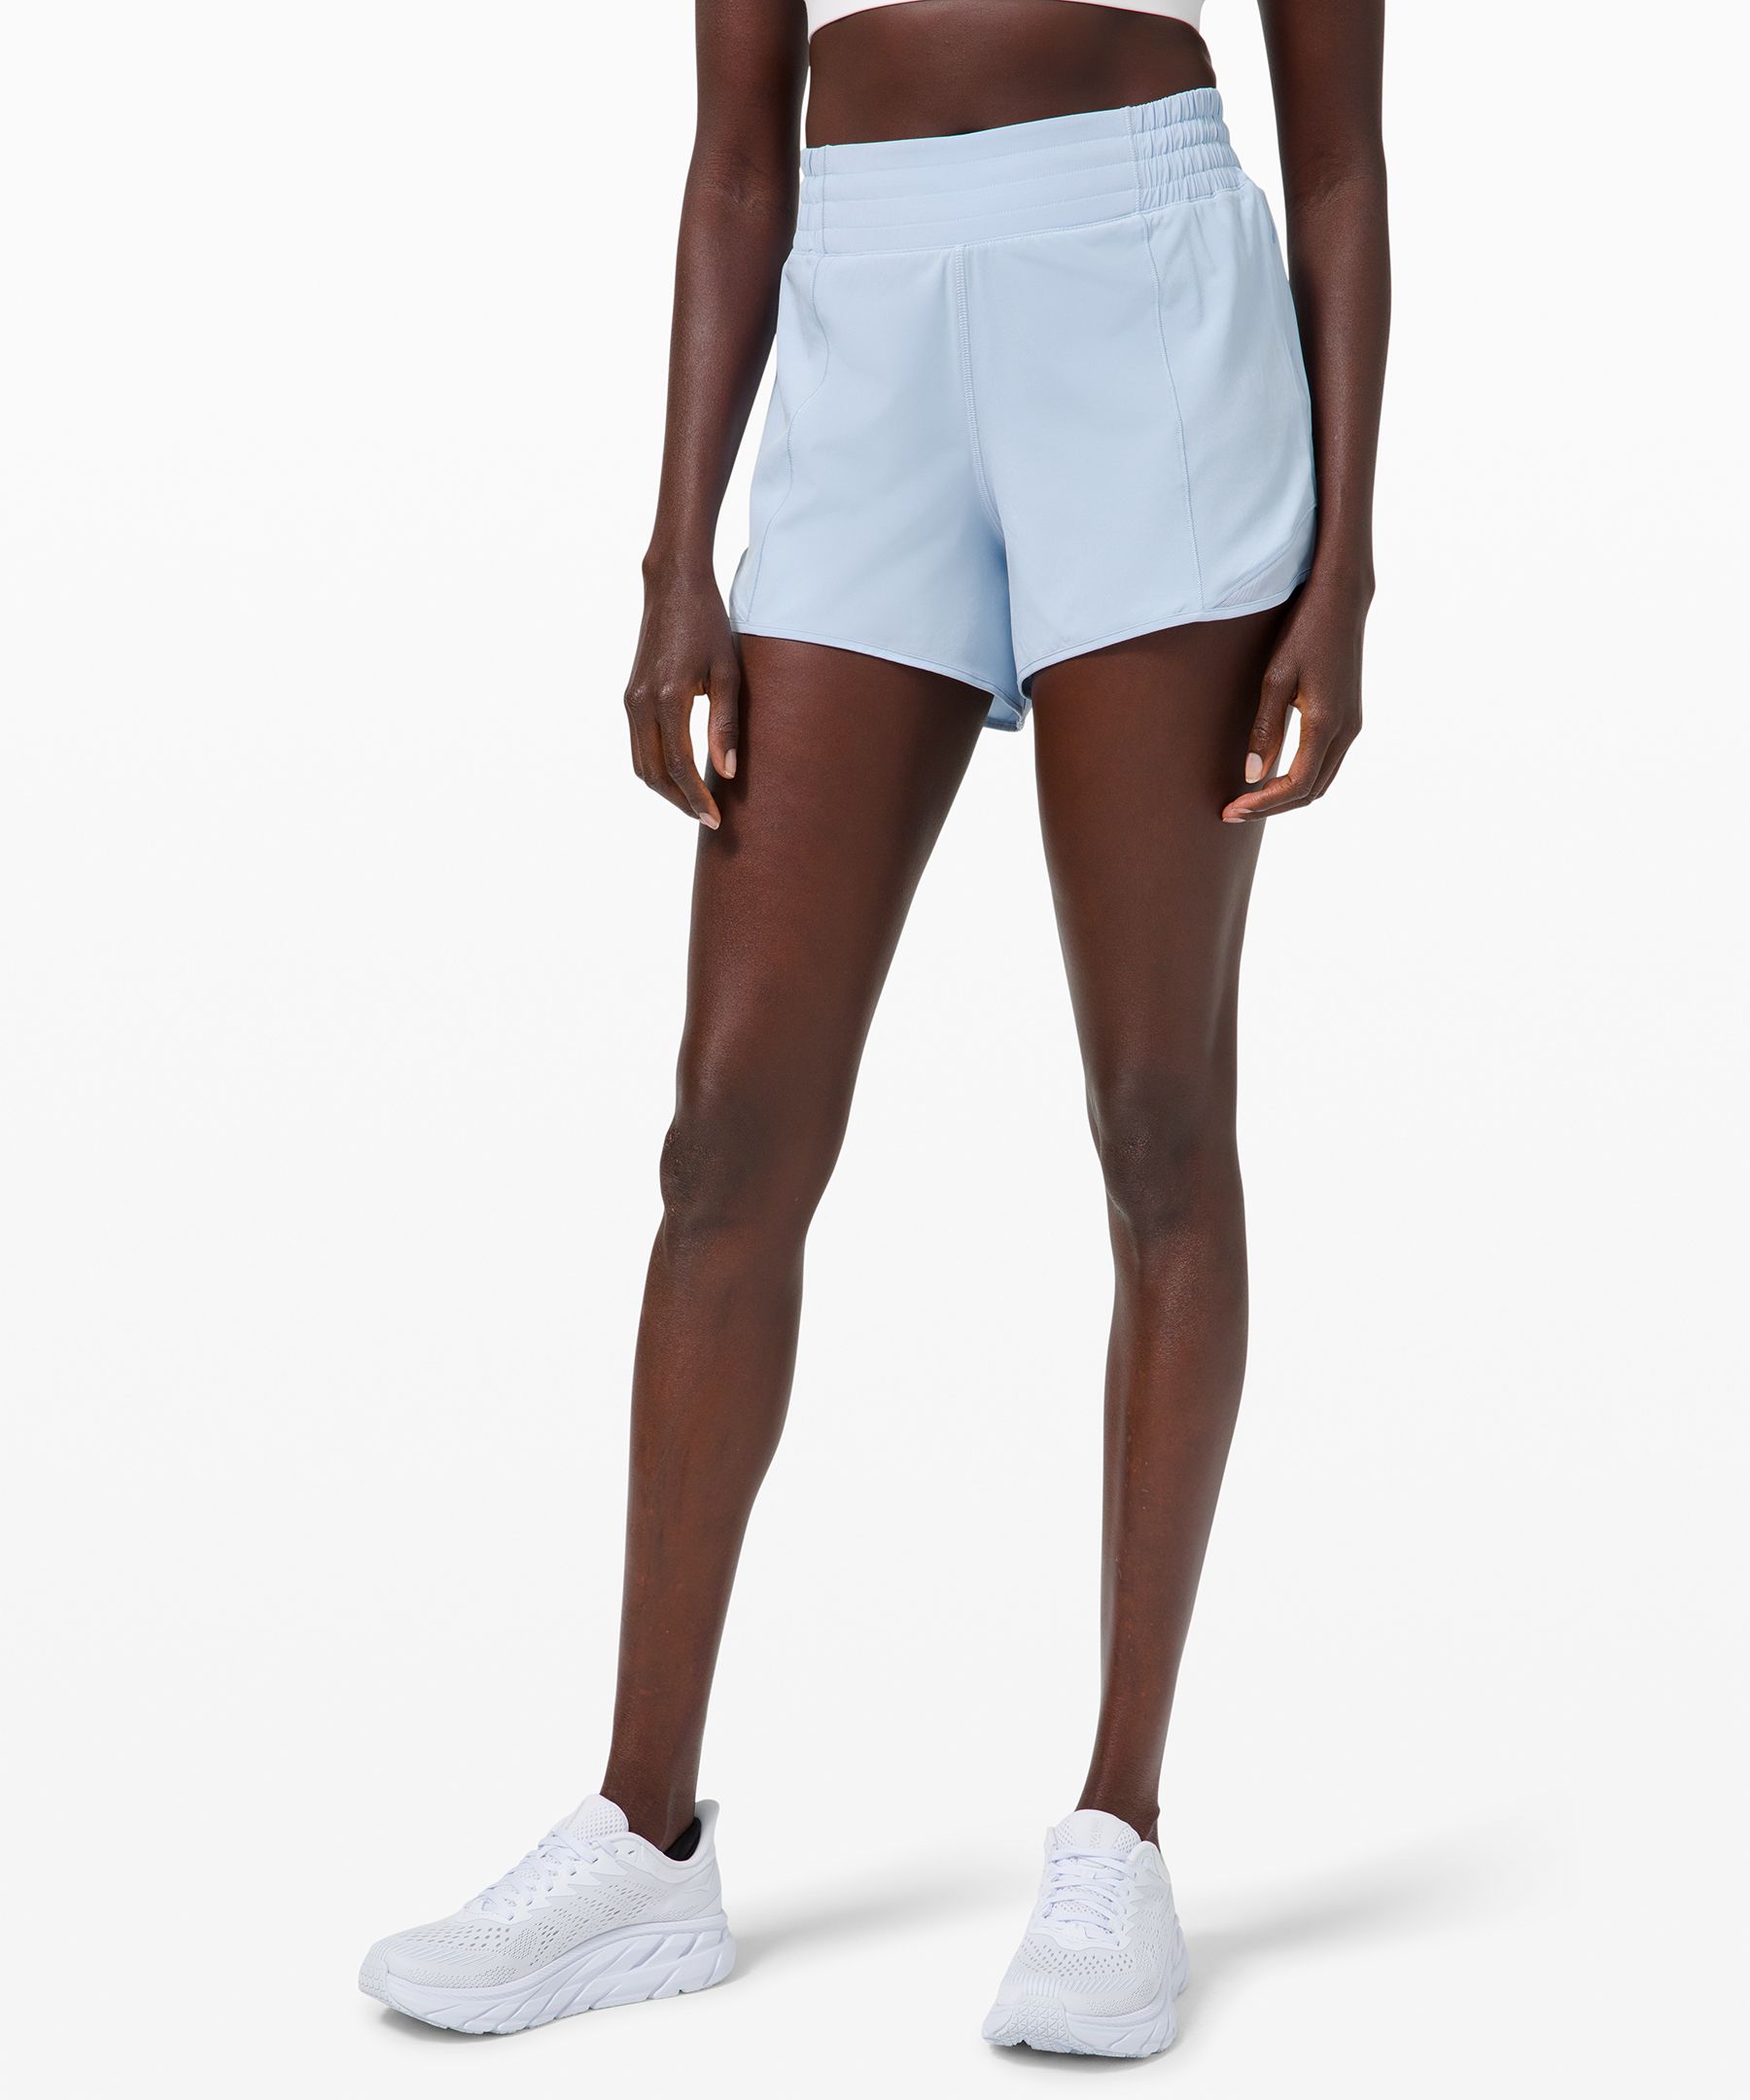 lululemon on the fly short review